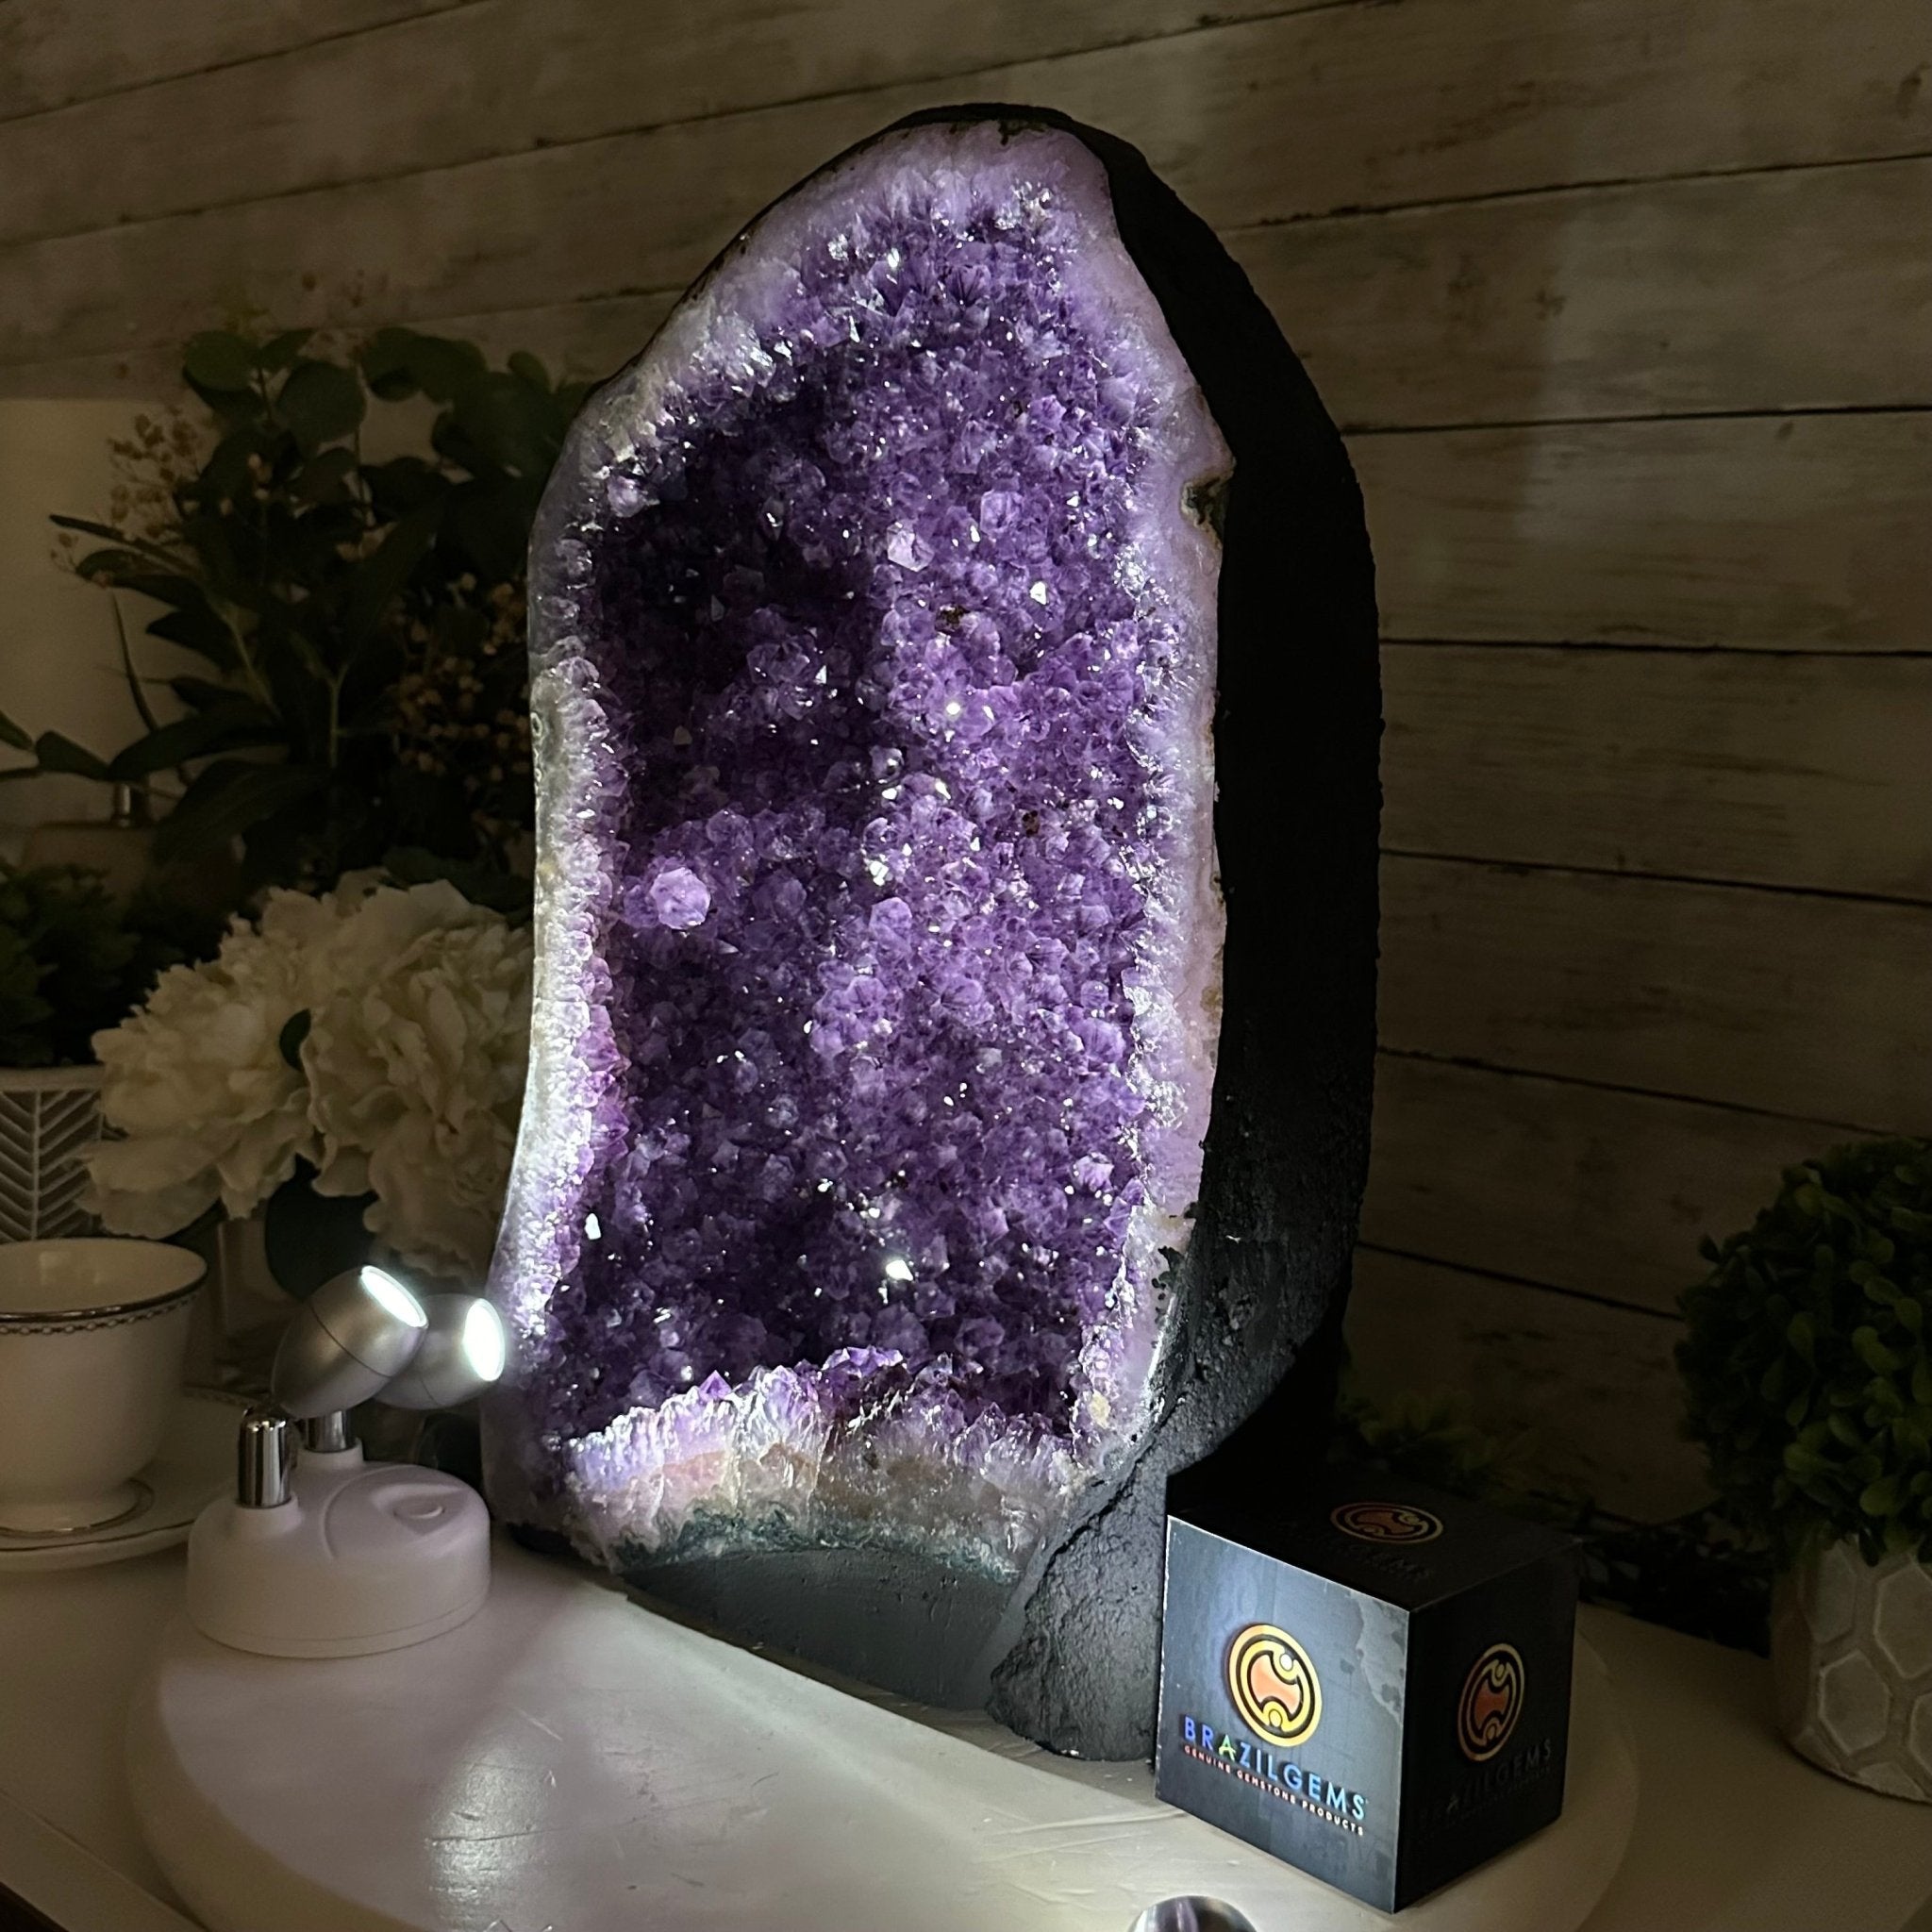 Quality Brazilian Amethyst Cathedral, 28.1 lbs & 15.1" Tall, #5601 - 1399 - Brazil GemsBrazil GemsQuality Brazilian Amethyst Cathedral, 28.1 lbs & 15.1" Tall, #5601 - 1399Cathedrals5601 - 1399